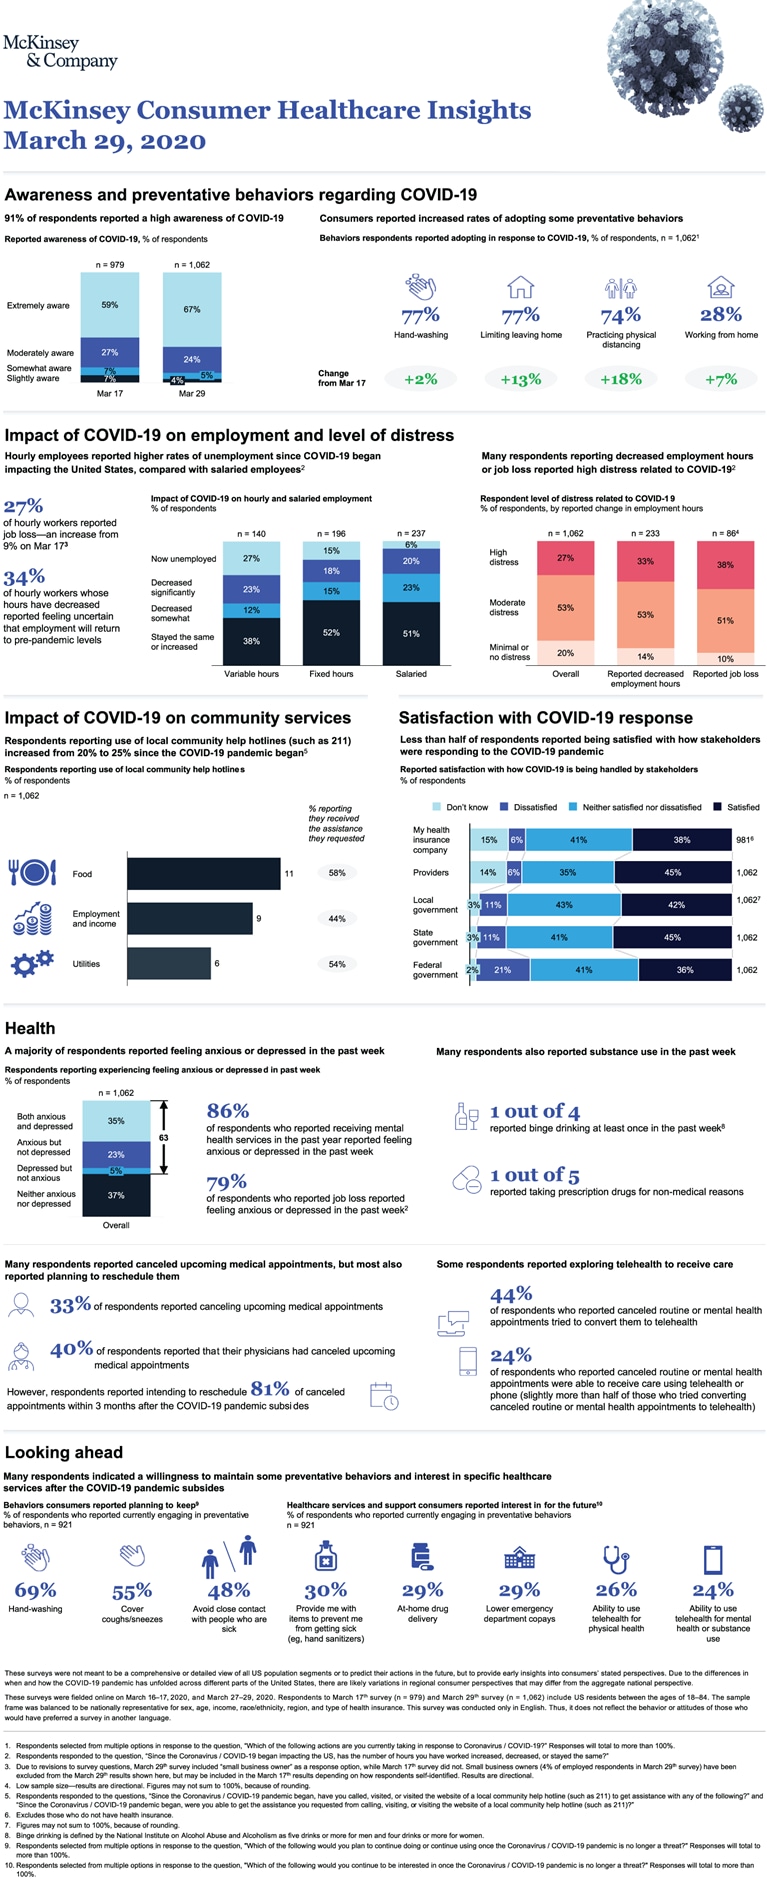 Helping US healthcare stakeholders understand the human side of the COVID-19 crisis: McKinsey Consumer Healthcare Insights